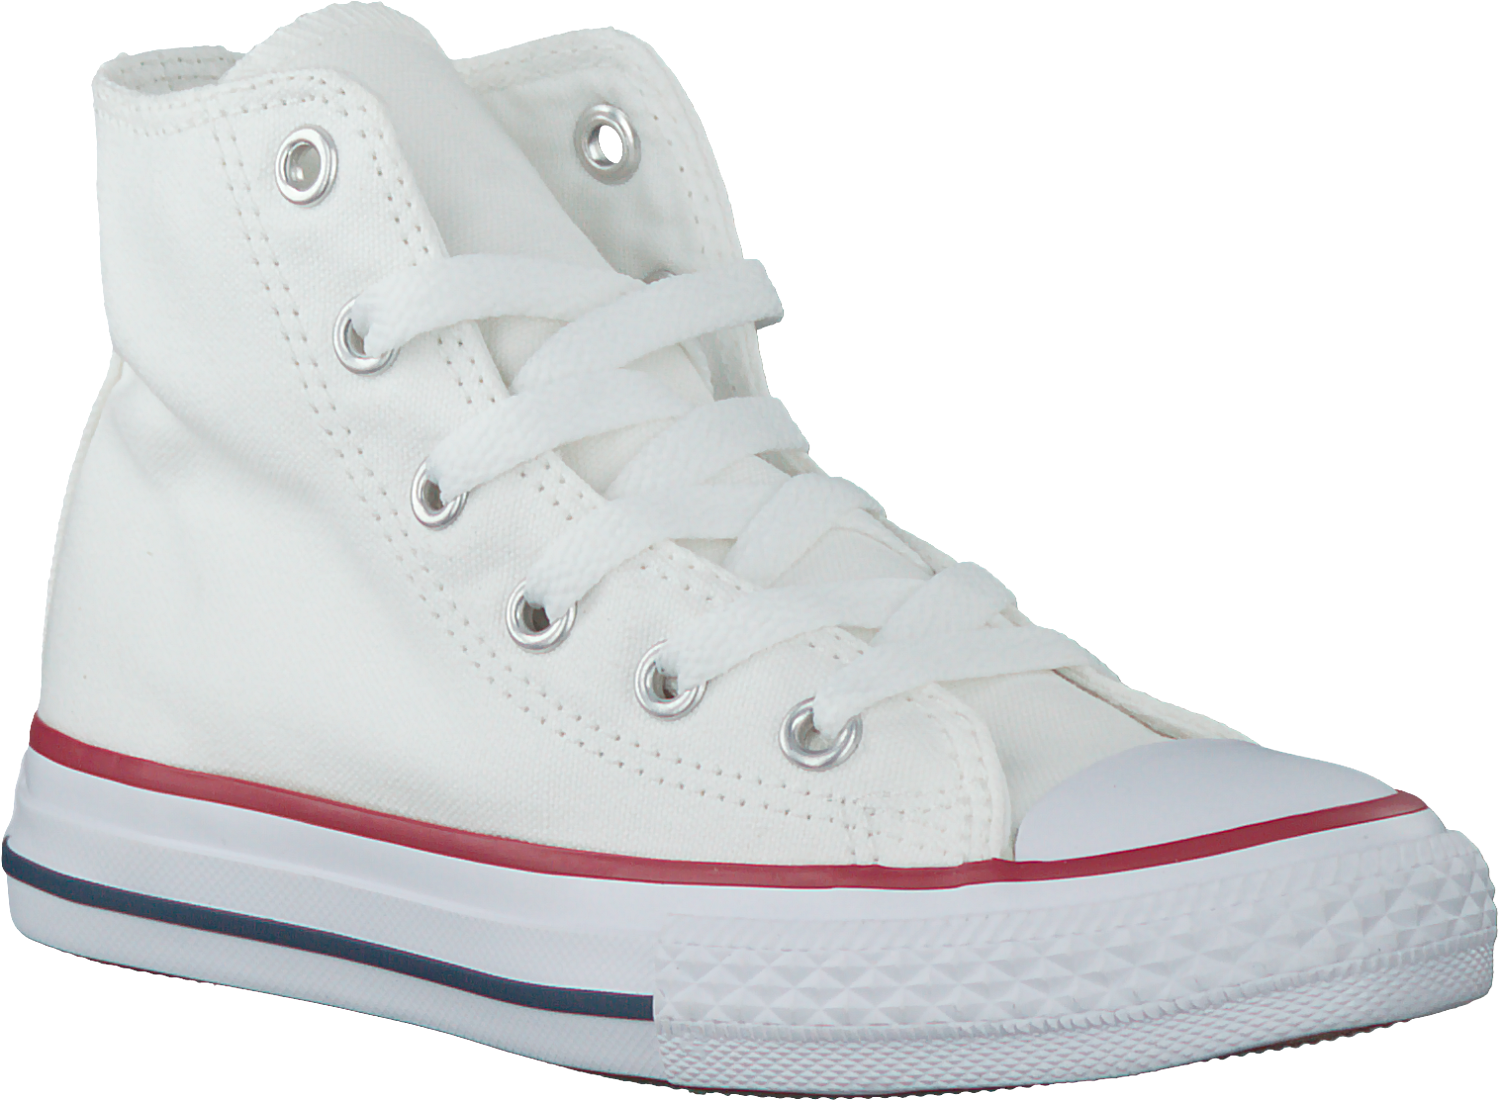 White Converse High Top Sneaker PNG image